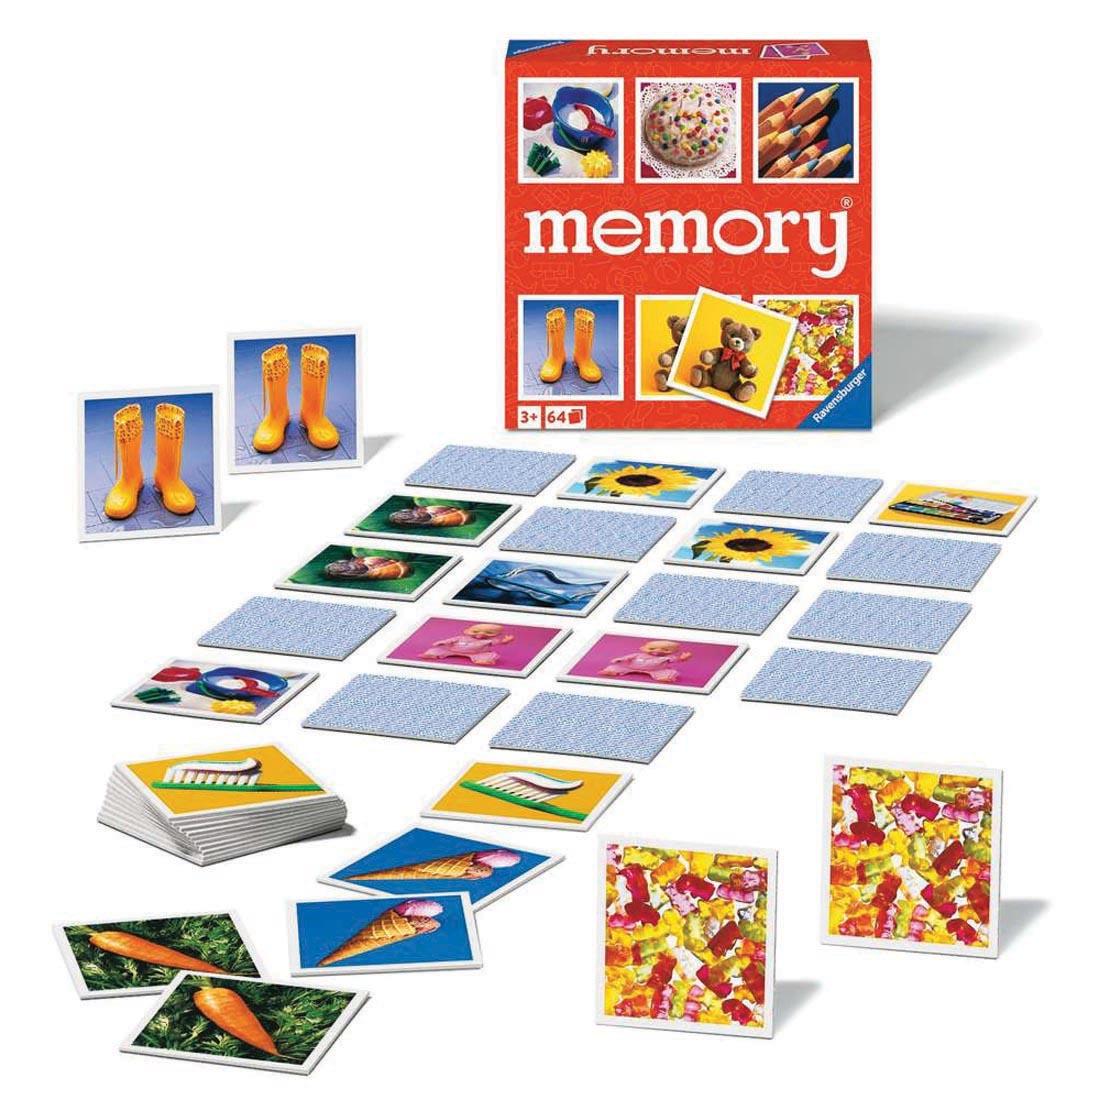 box and contents of Junior Memory Game